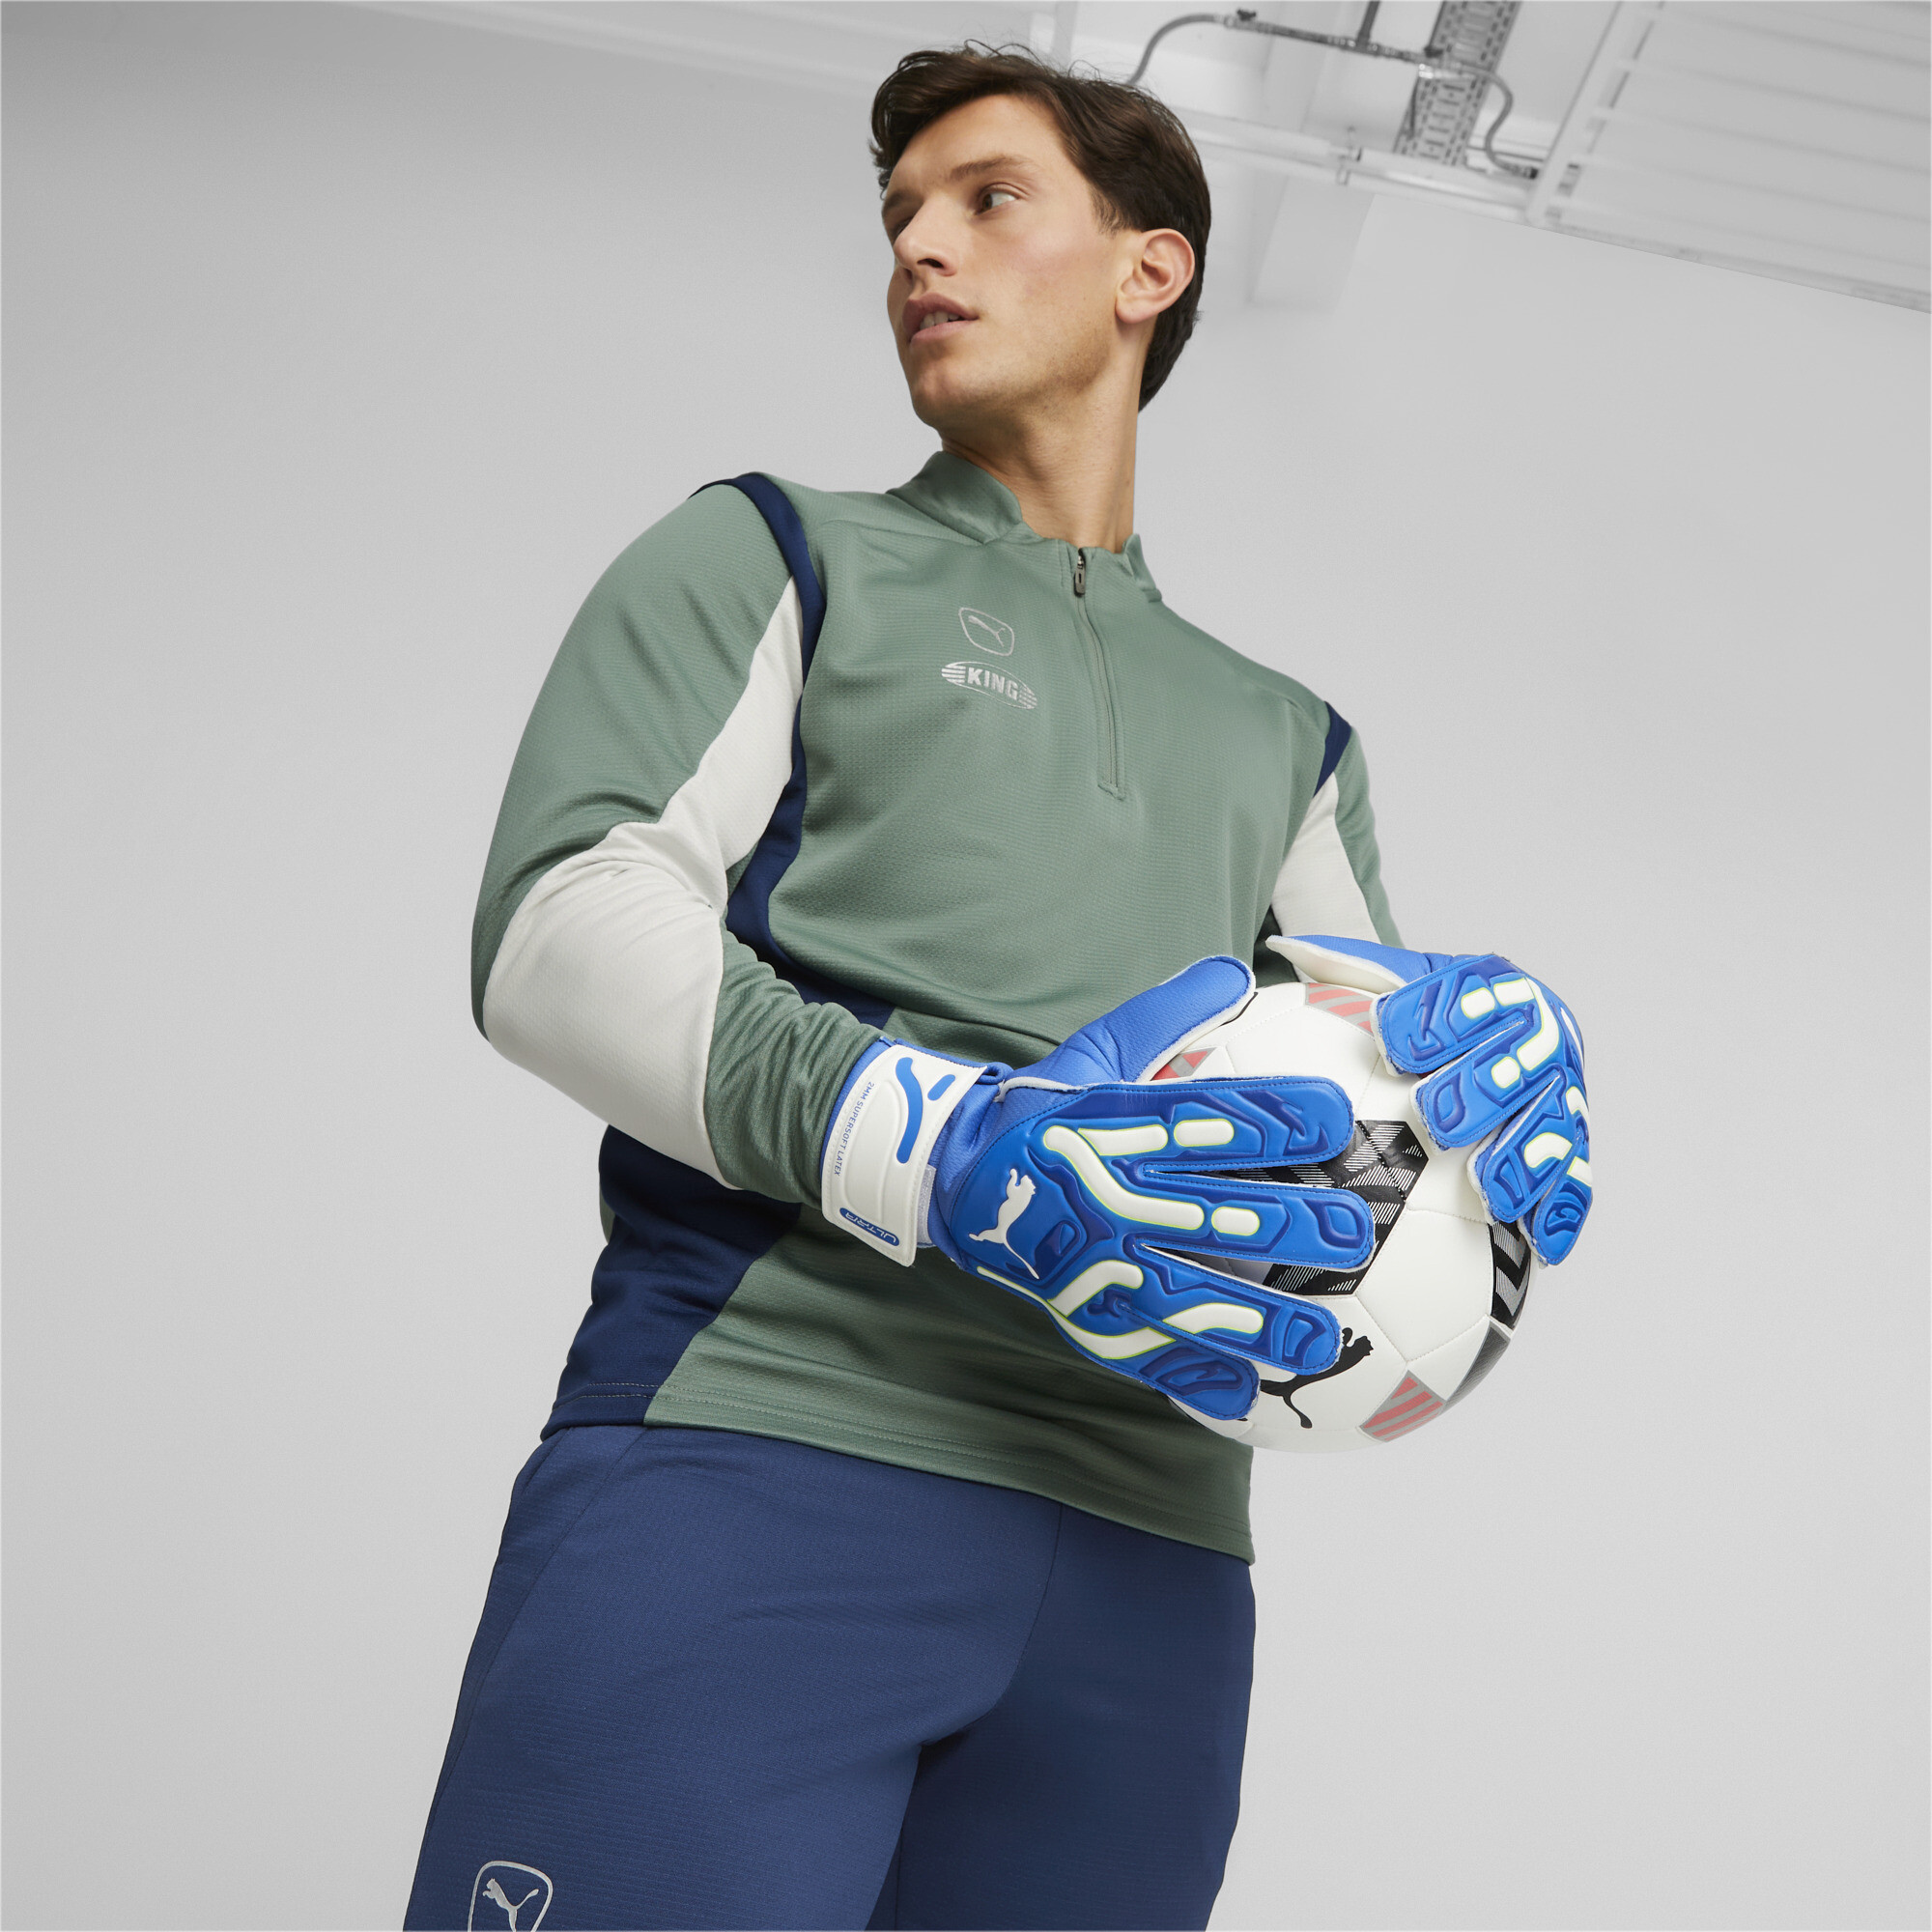 Puma ULTRA Play RC Goalkeeper Gloves, Blue, Size 10, Accessories